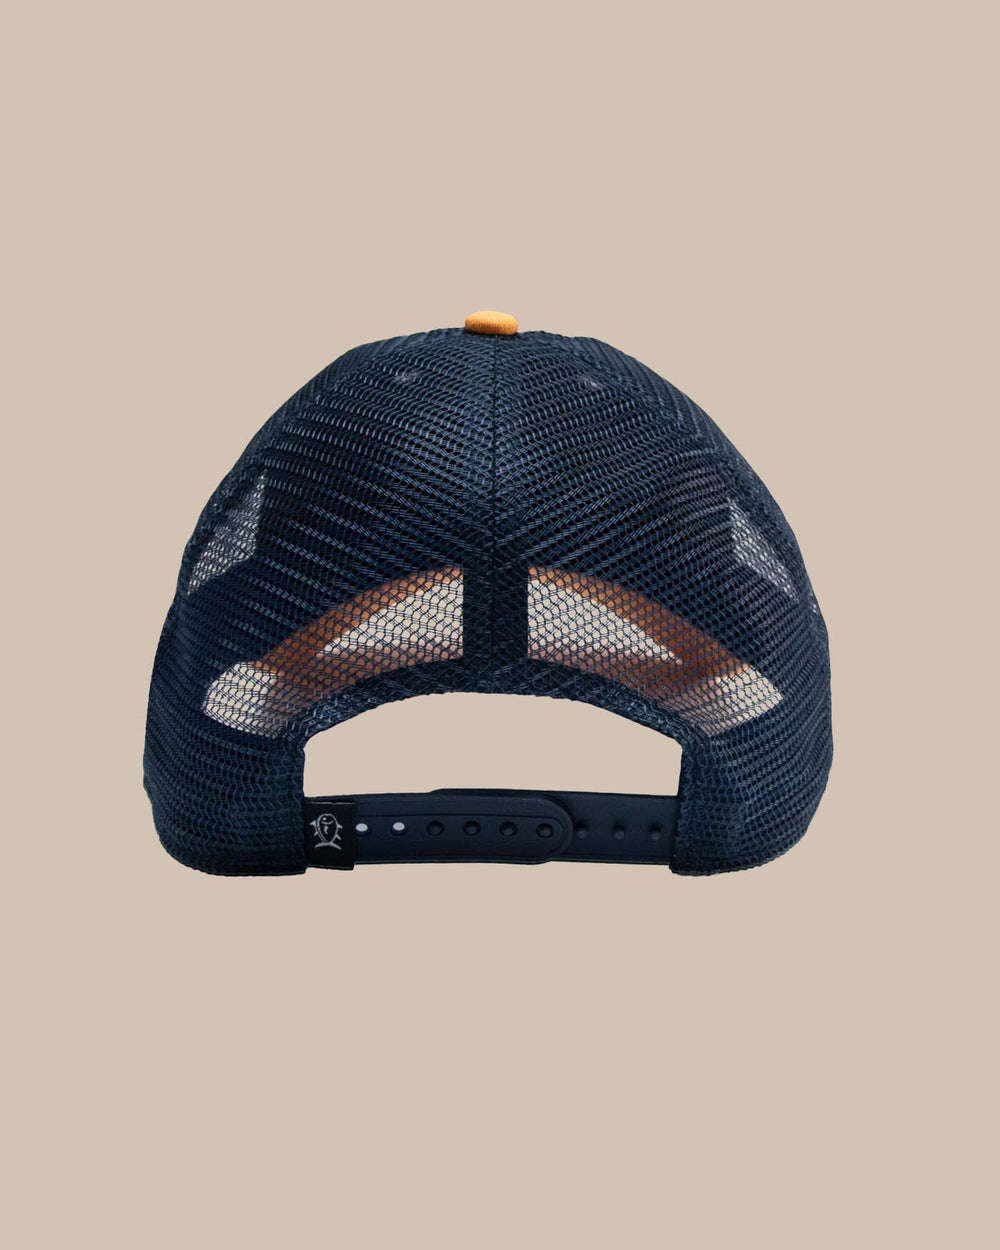 The back view of the Southern Tide Kids The Skipjack Trucker Hat by Southern Tide - White